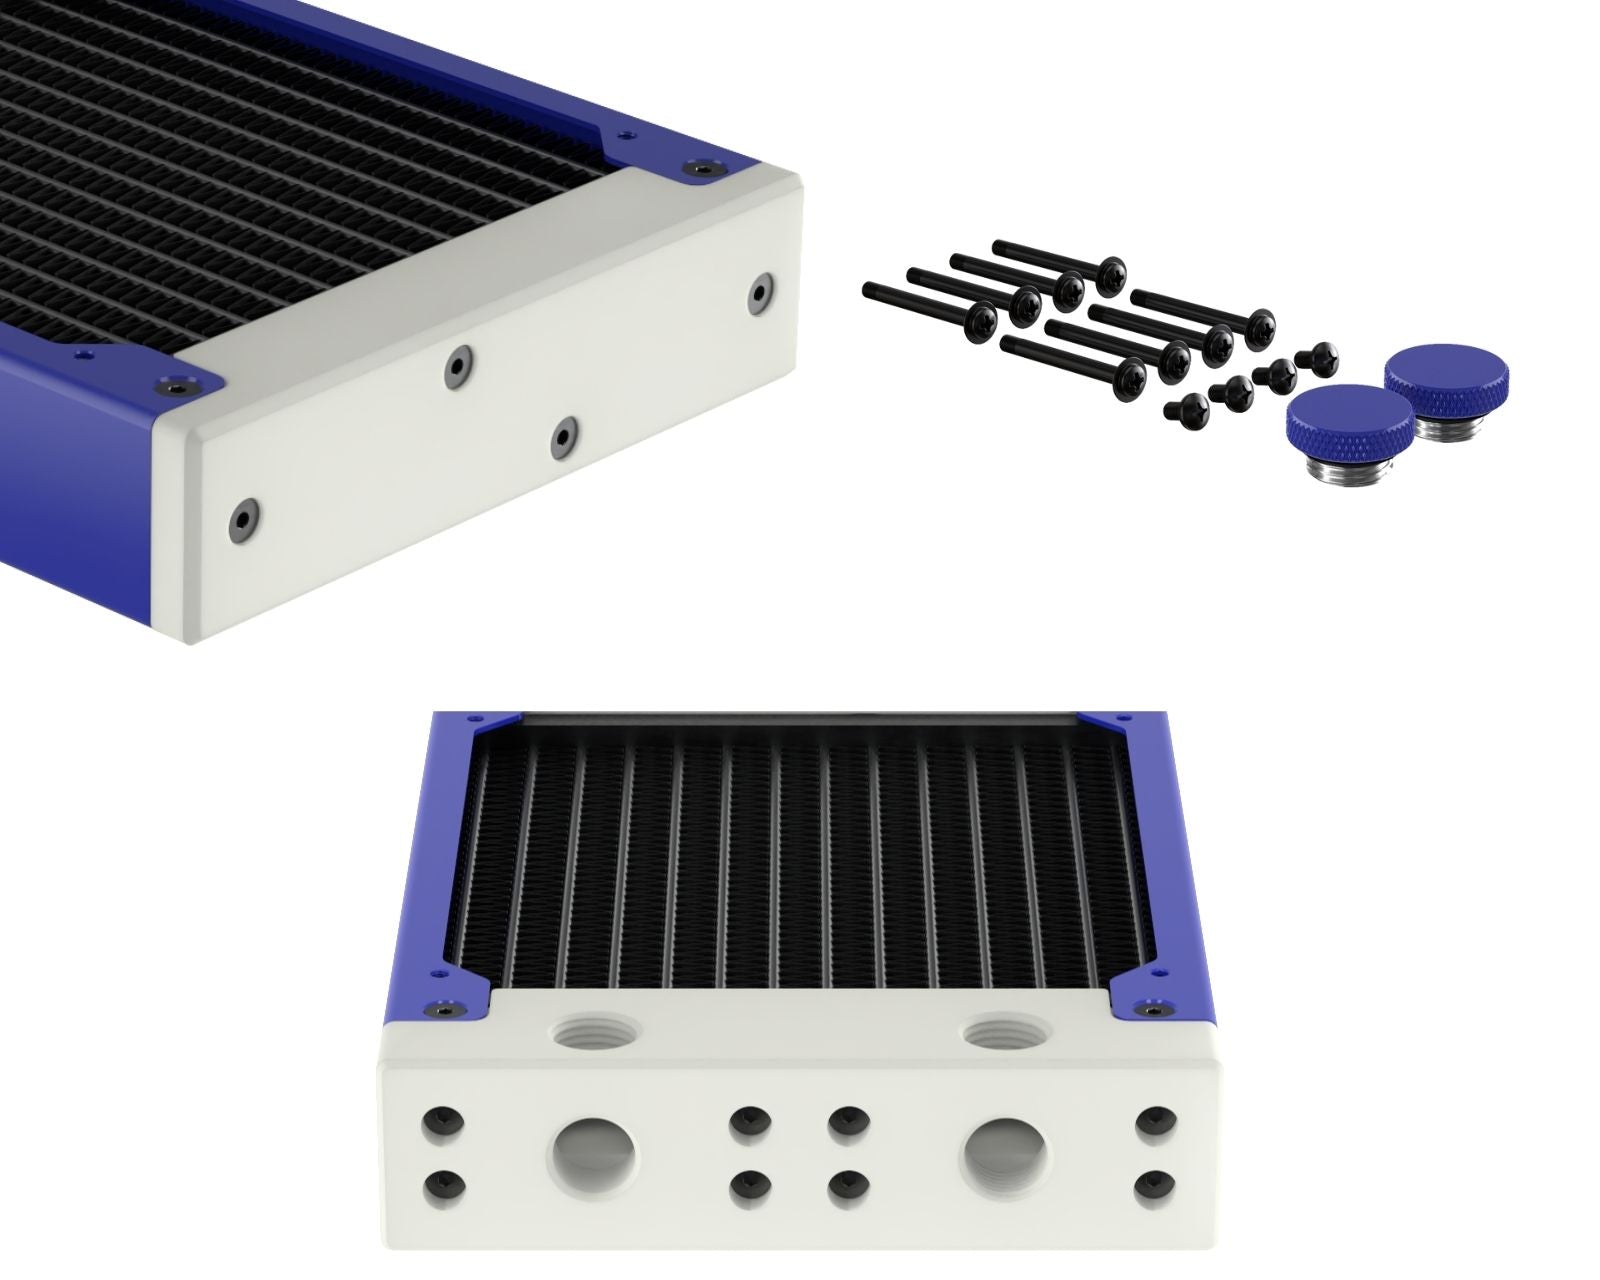 PrimoChill 240SL (30mm) EXIMO Modular Radiator, White POM, 2x120mm, Dual Fan (R-SL-W24) Available in 20+ Colors, Assembled in USA and Custom Watercooling Loop Ready - True Blue